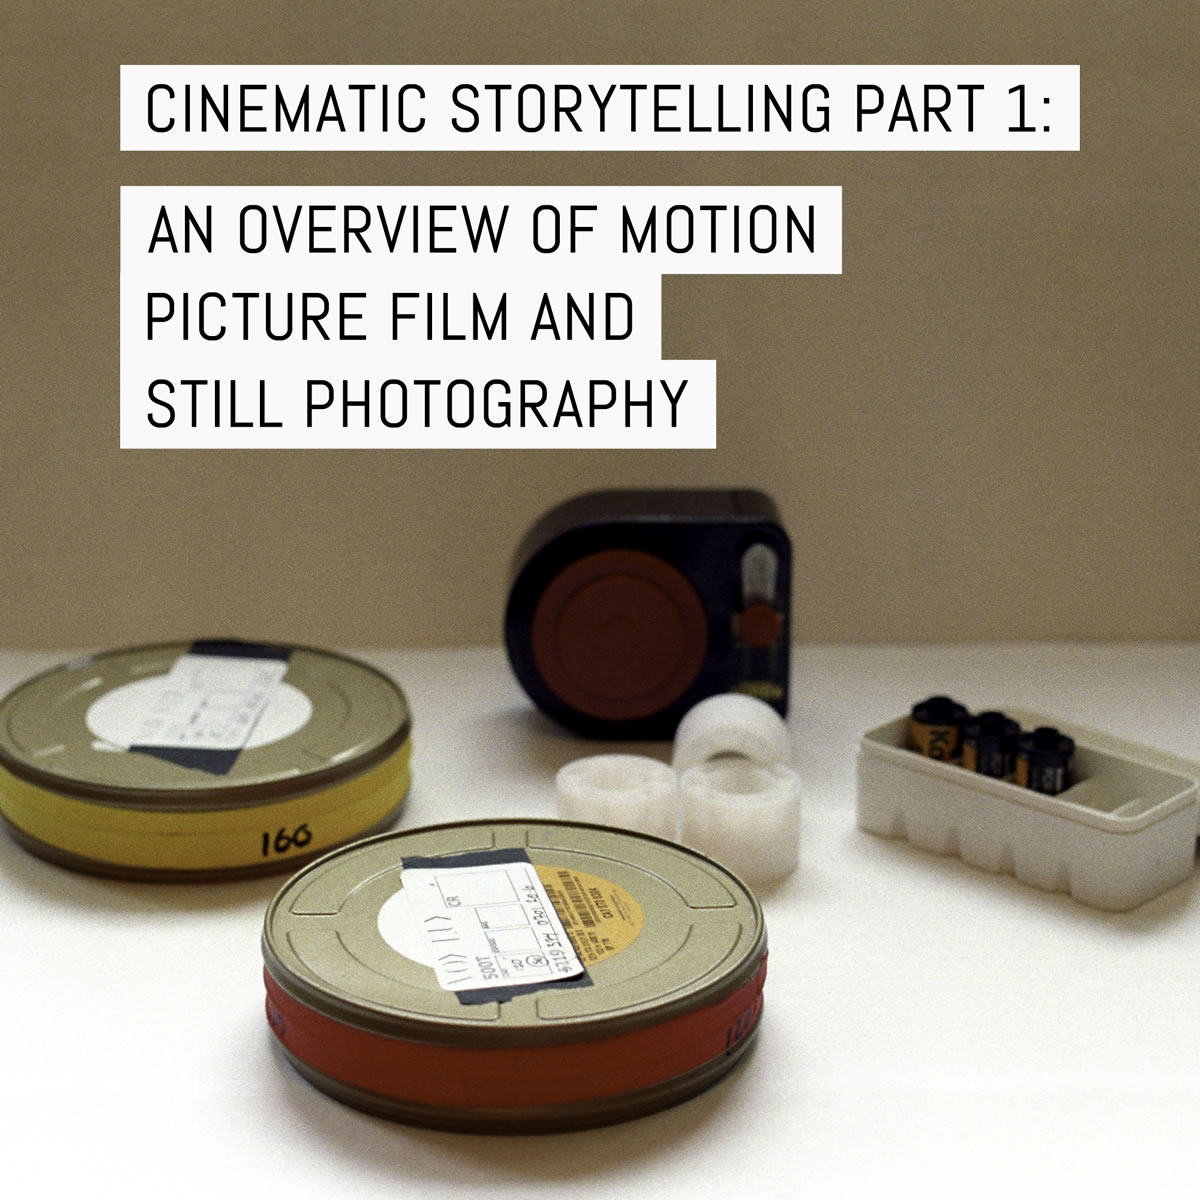 Cinematic storytelling part 1: an overview of motion picture film and still photography